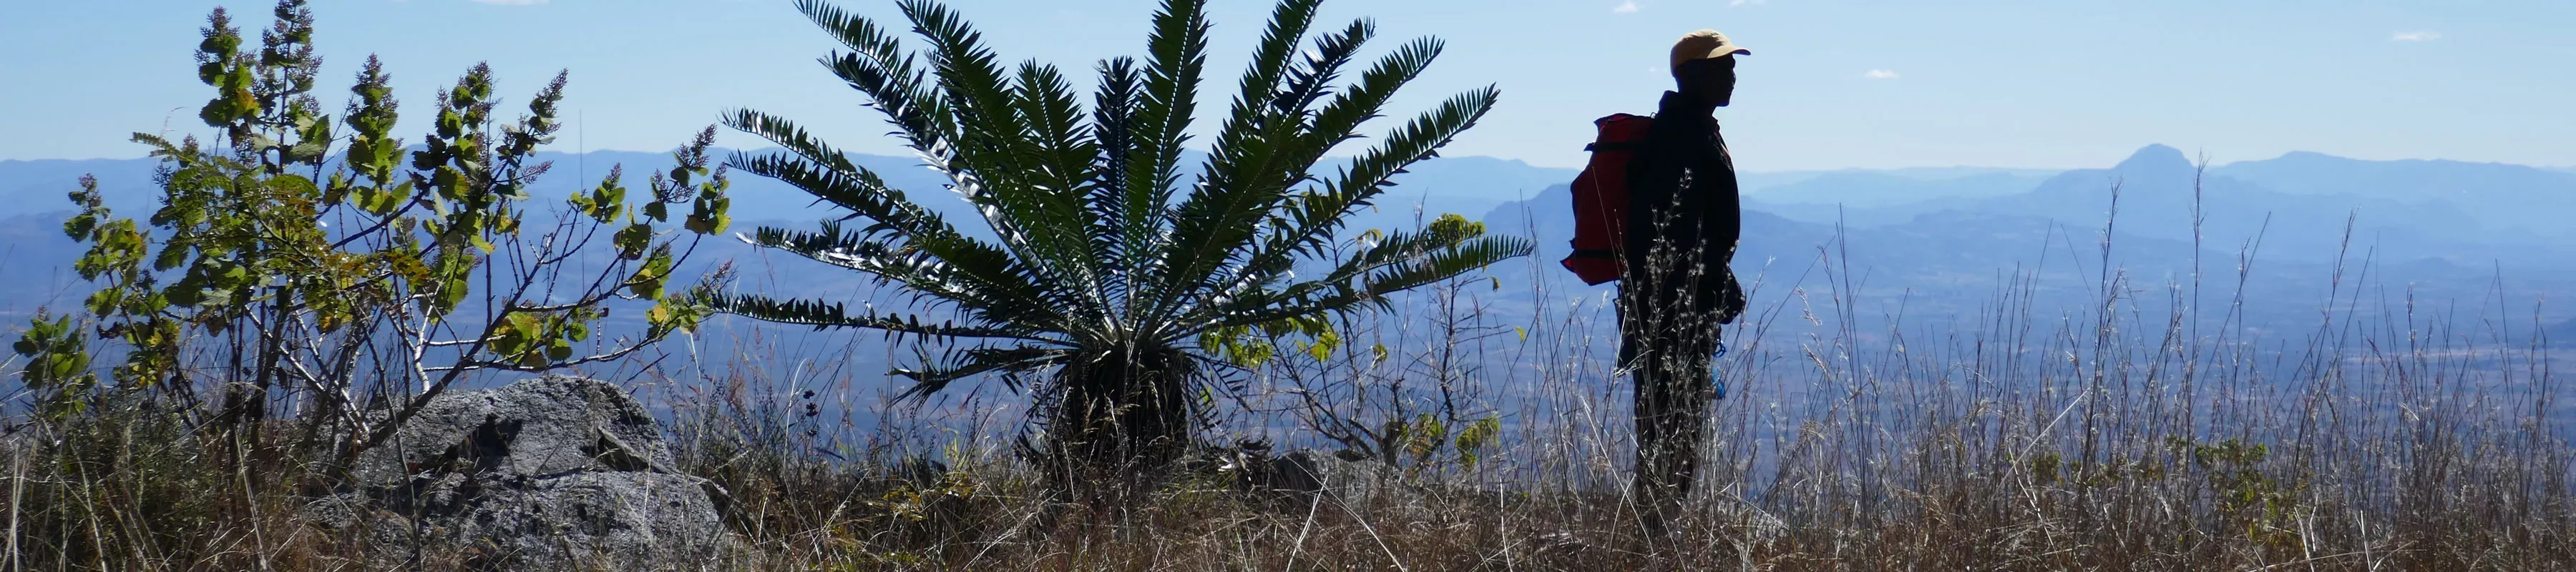 Man stood on a mountain next to large cycad